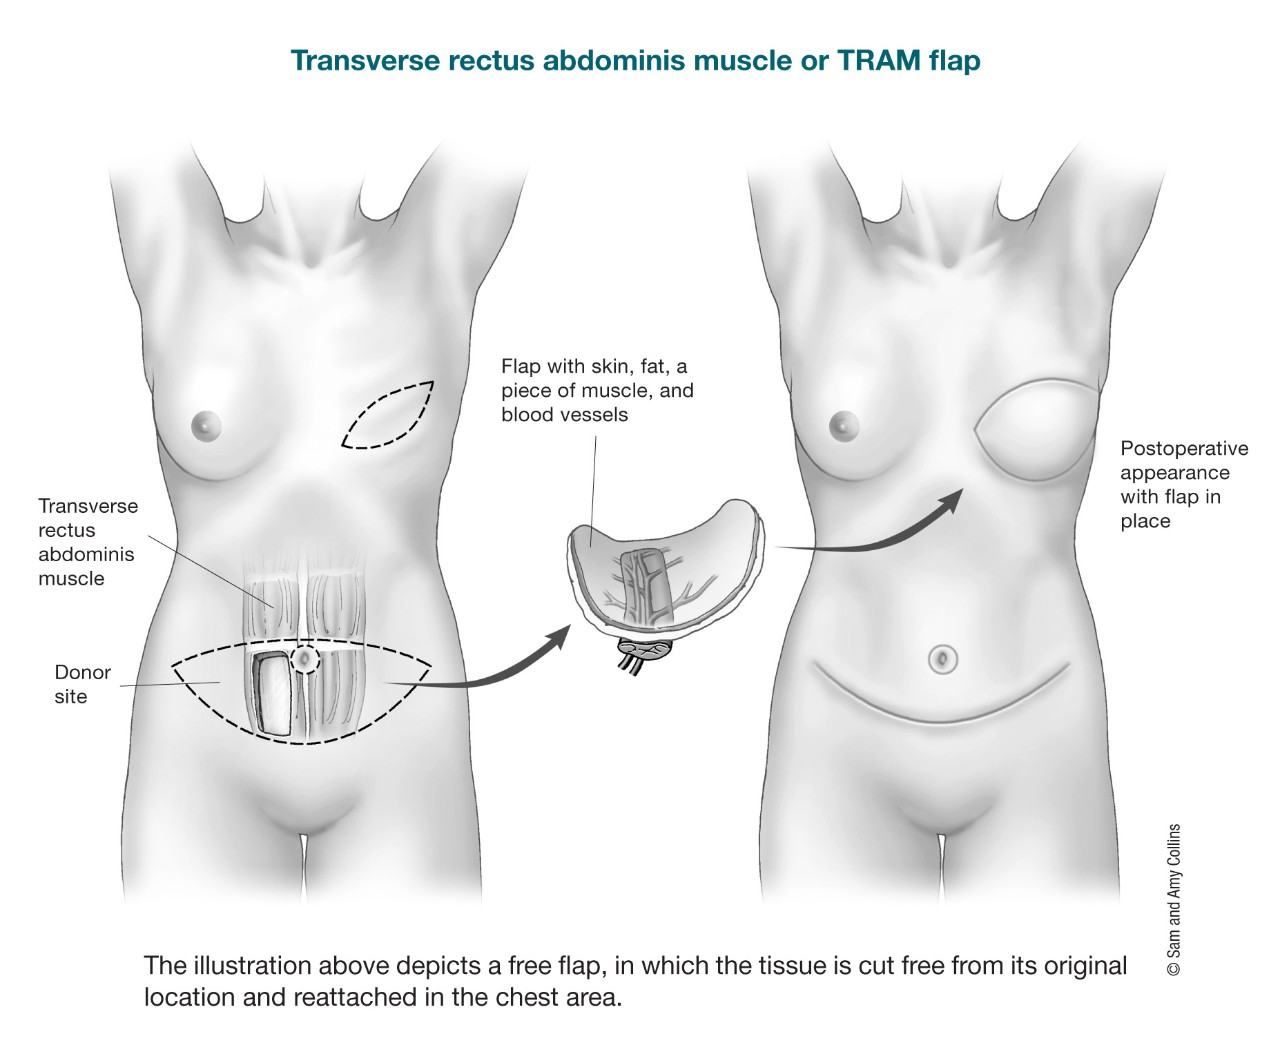 illustration depicting a free flap in which the tissue is cut free from its original location and reattached in the chest area